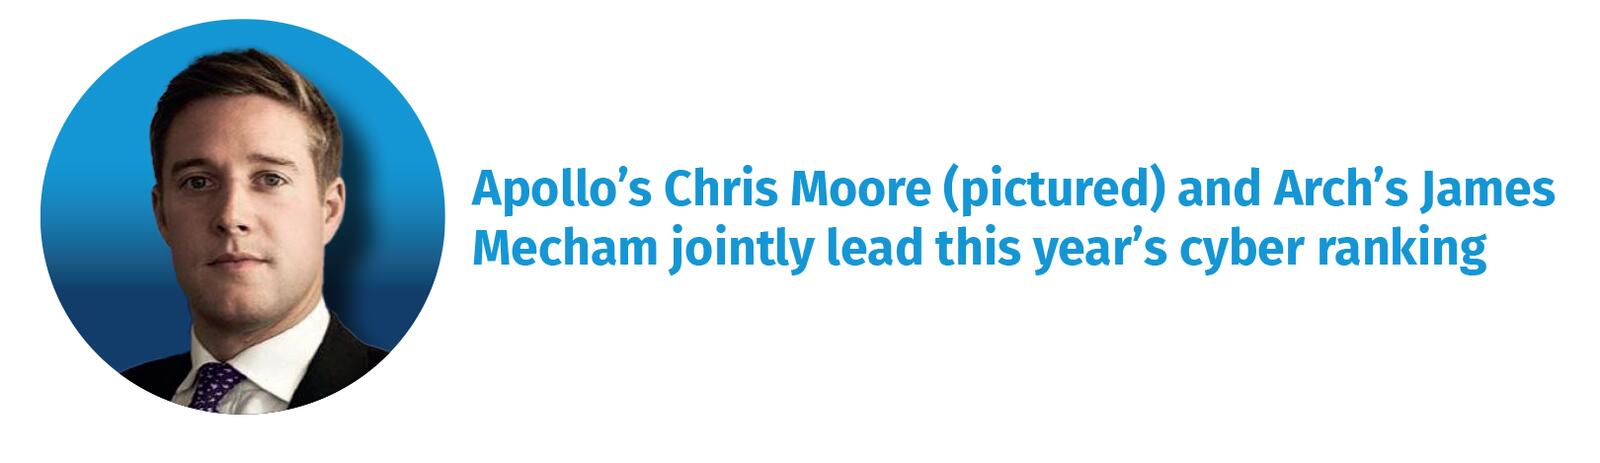 Apollo’s Chris Moore (pictured) and Arch’s James Mecham jointly lead this year’s cyber ranking